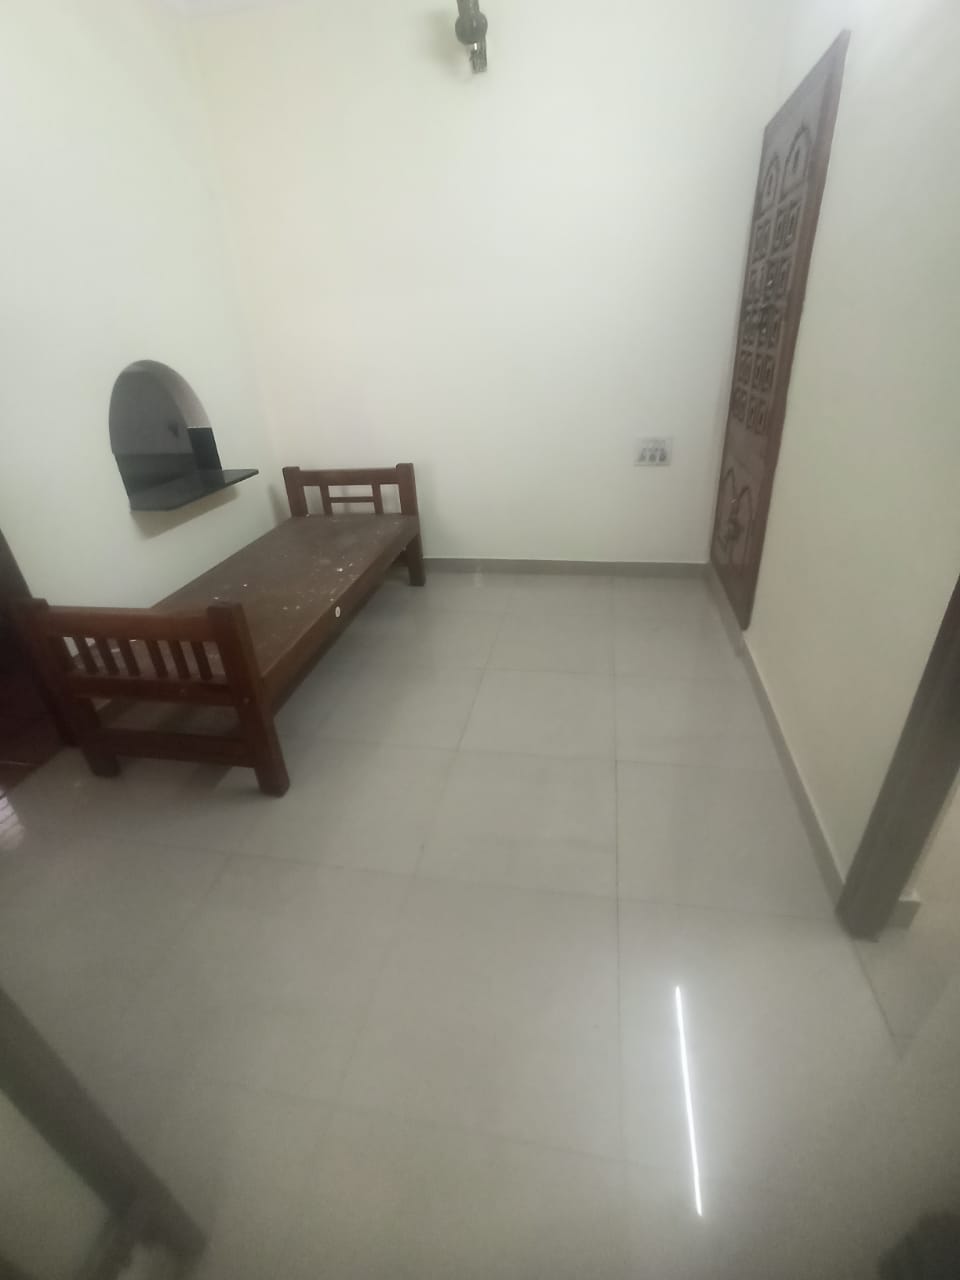 1 BHK Independent House for Lease Only at JAML2 - 3477 in Rajaji Nagar